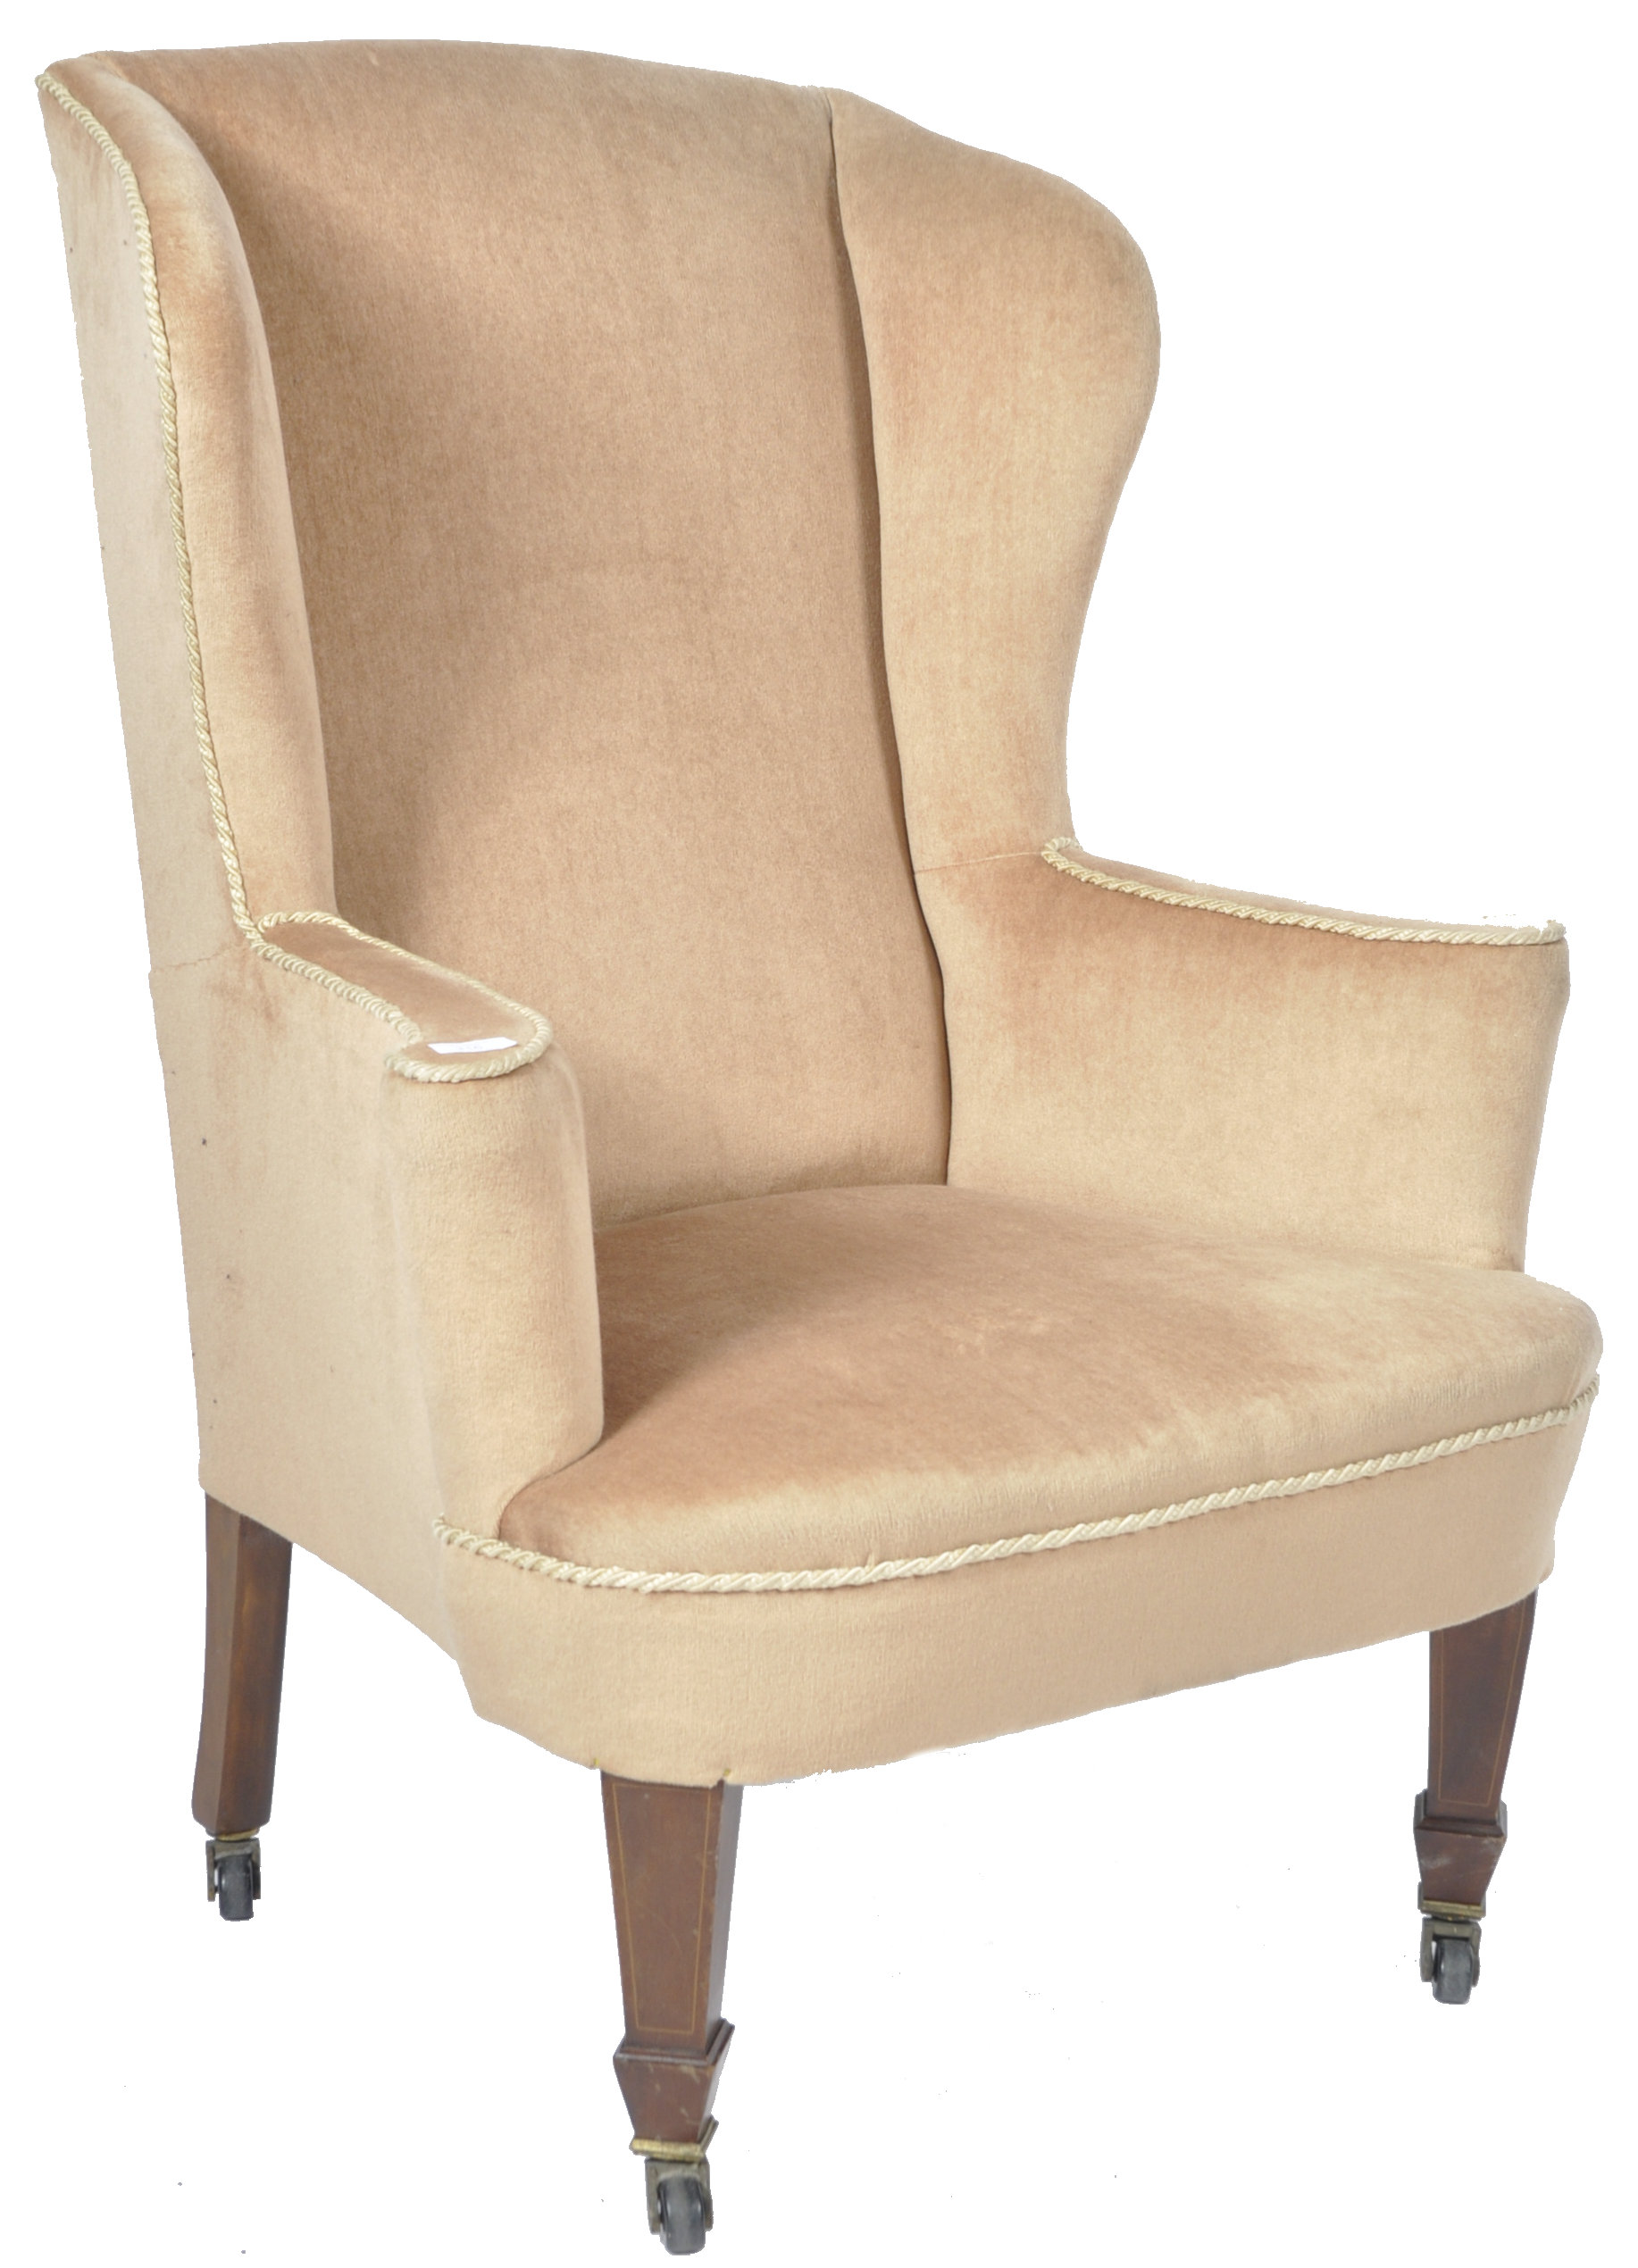 ANTIQUE 19TH CENTURY WINGBACK FIRESIDE ARMCHAIR